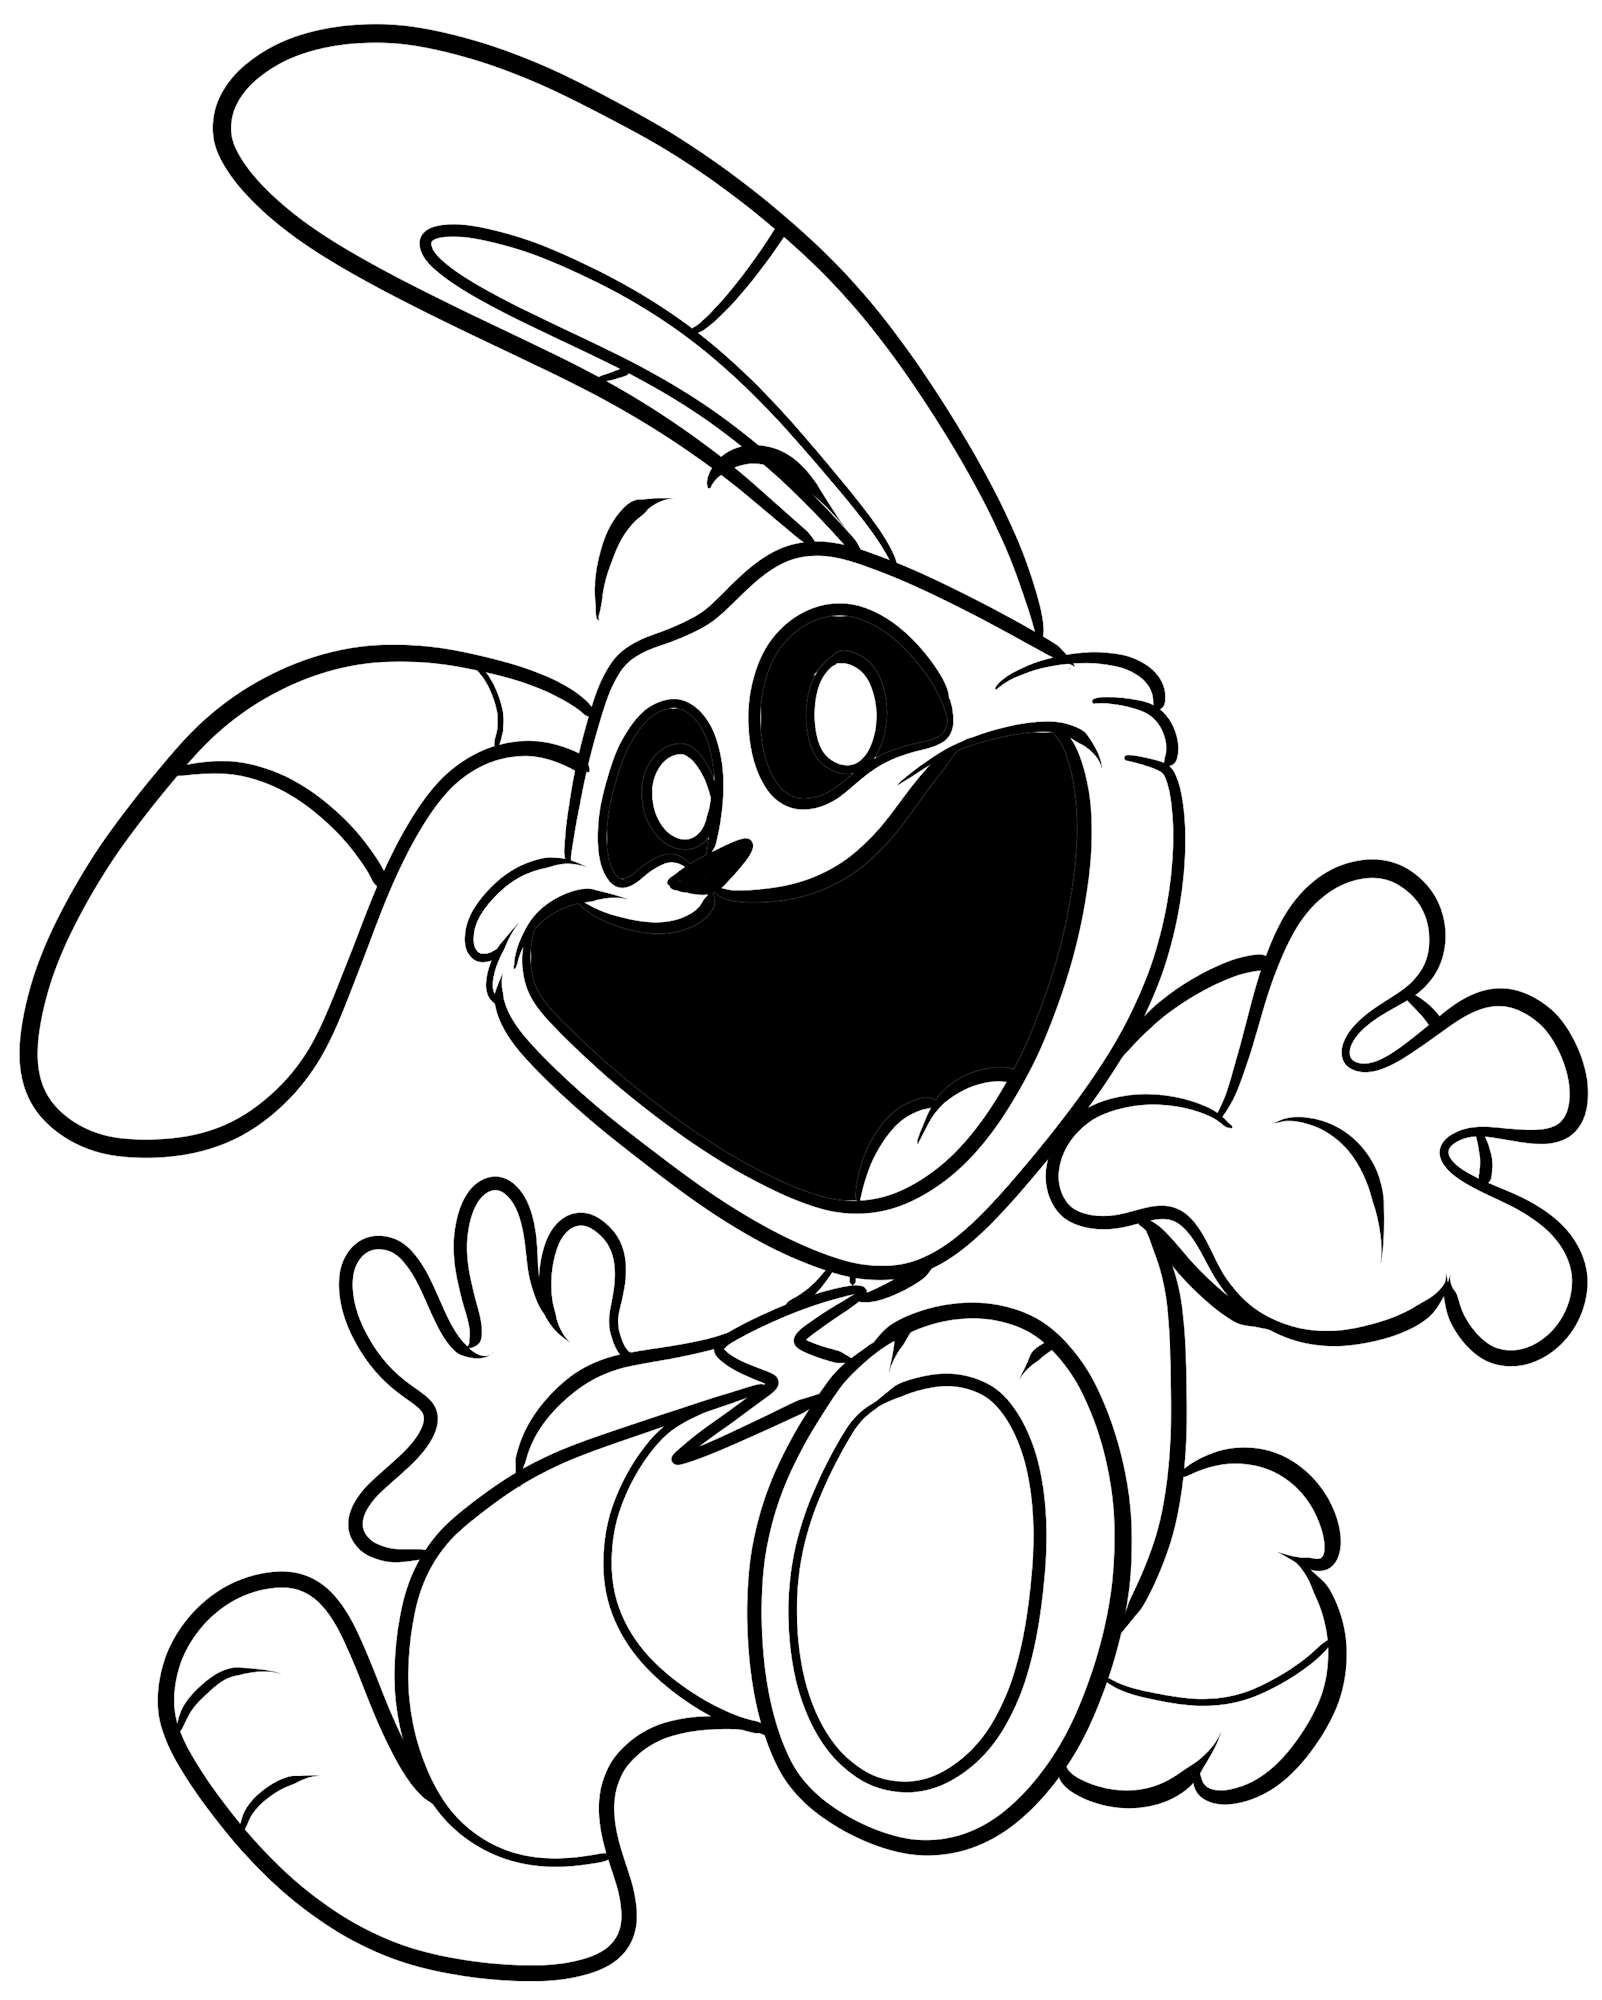 Hoppy Hopscotch from Smiling Critters coloring pages to print and coloring